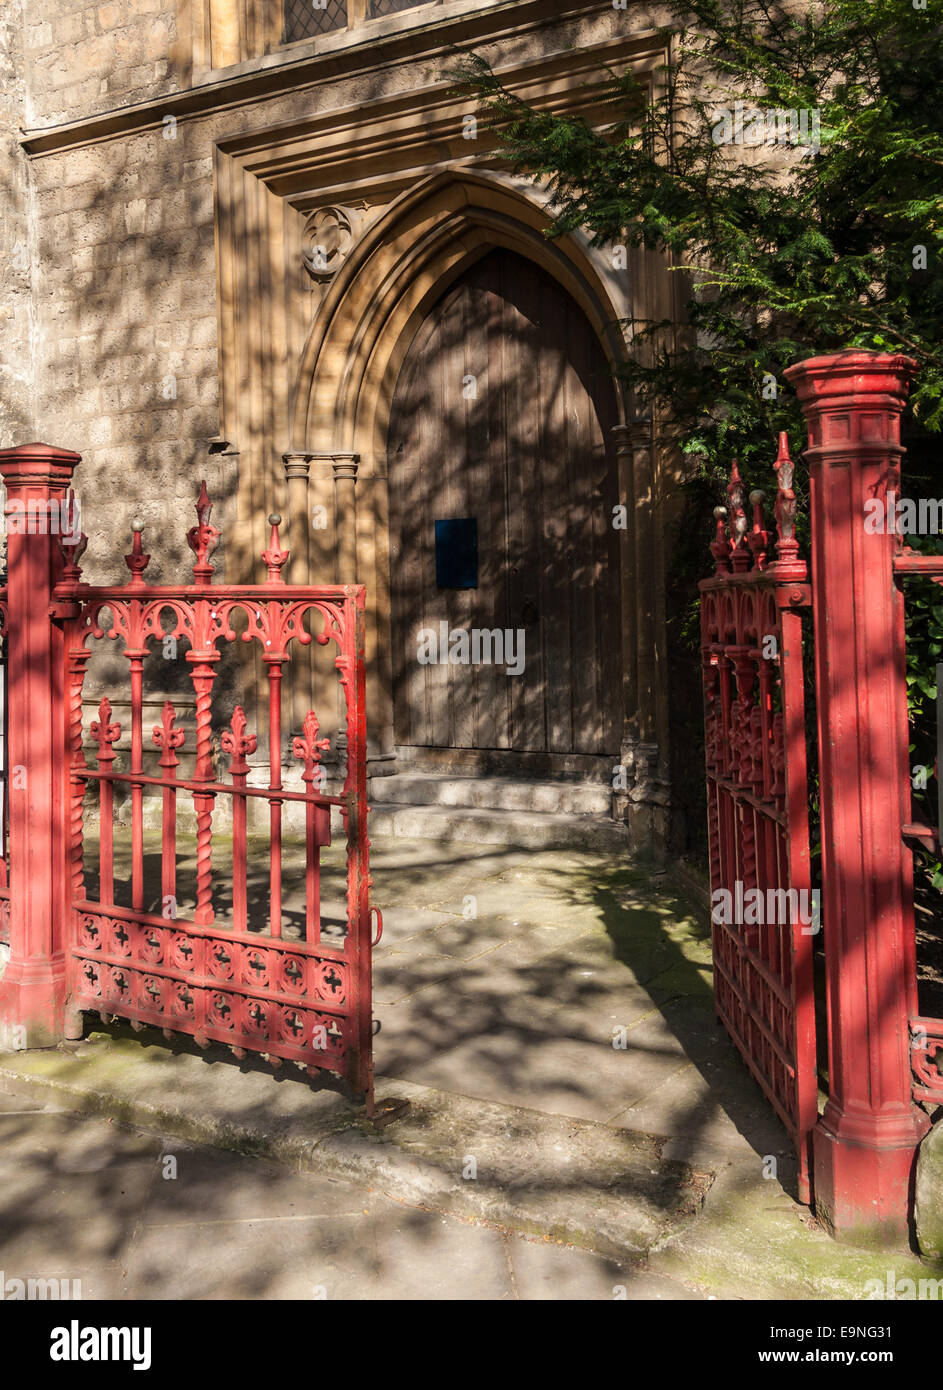 A red gate opens to a an arched wood door at St Sepulchre-without-Newgate Holburn Viaduct London England Stock Photo